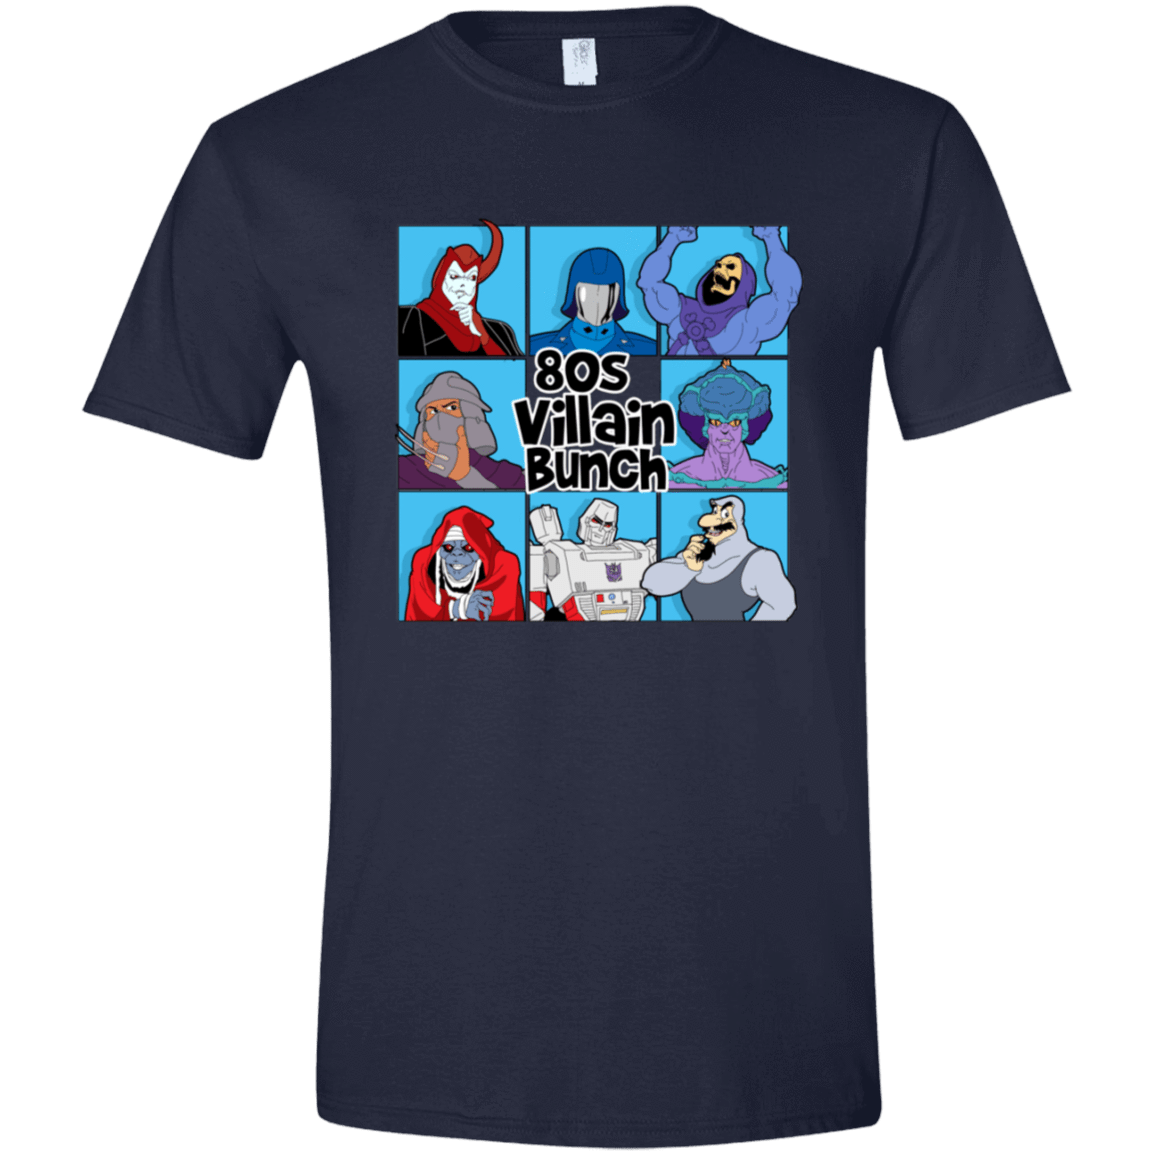 T-Shirts Navy / S 80s Villians Bunch Men's Semi-Fitted Softstyle